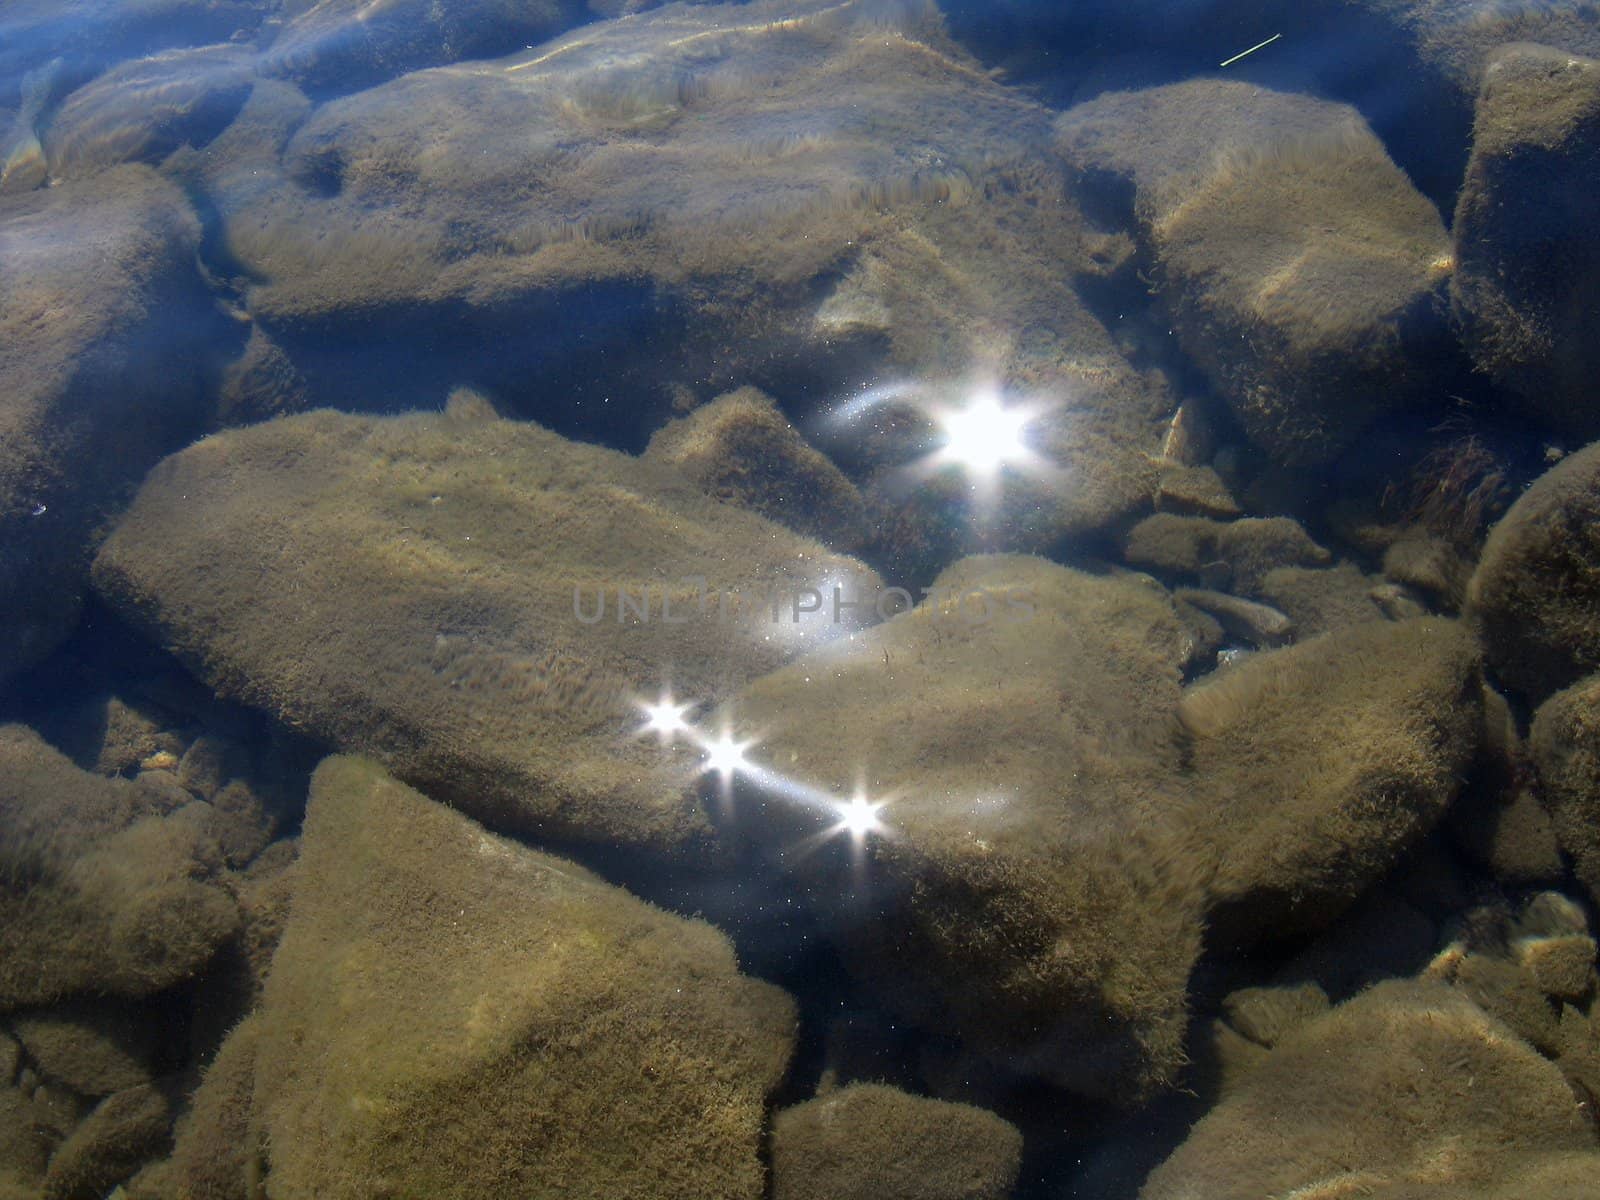 Underwater stones covered by algae with reflected light